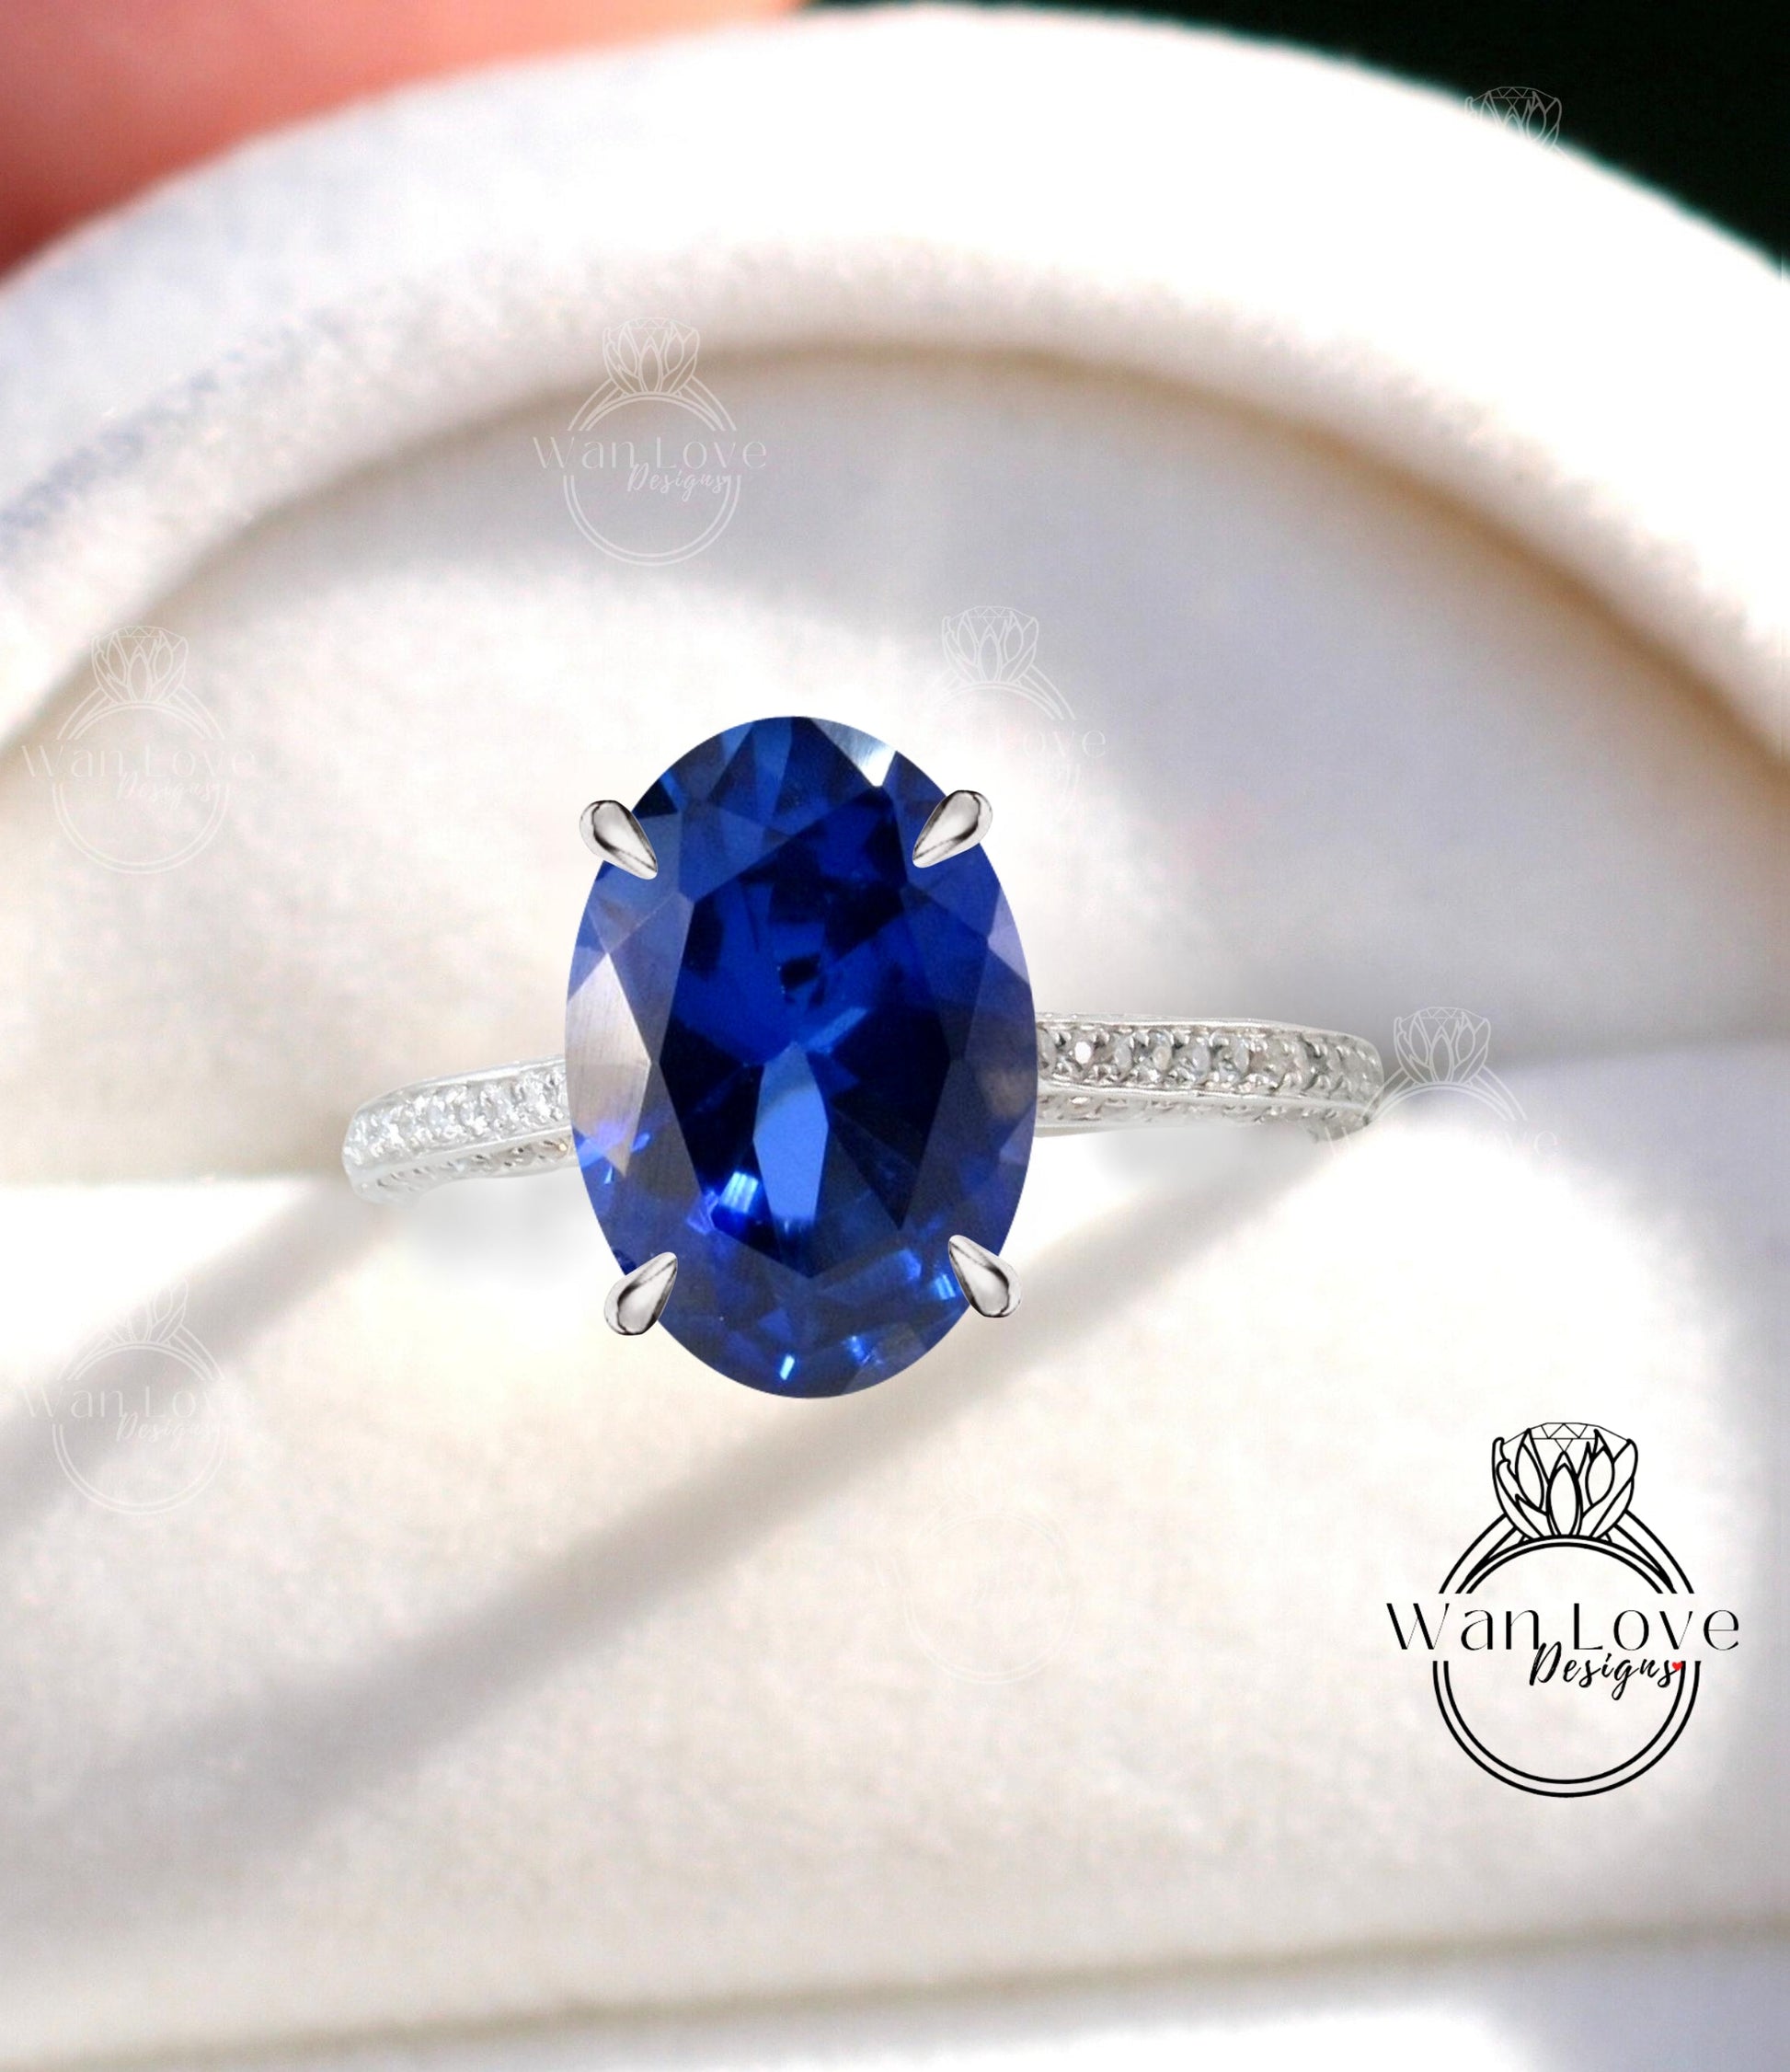 Oval Cut Blue Sapphire Engagement Ring in 14k/18k Rose White Gold, Elongated Oval Diamond Ring, Celebrity Oval Engagement Ring, 3 sided Bridal Band Ring Wan Love Designs